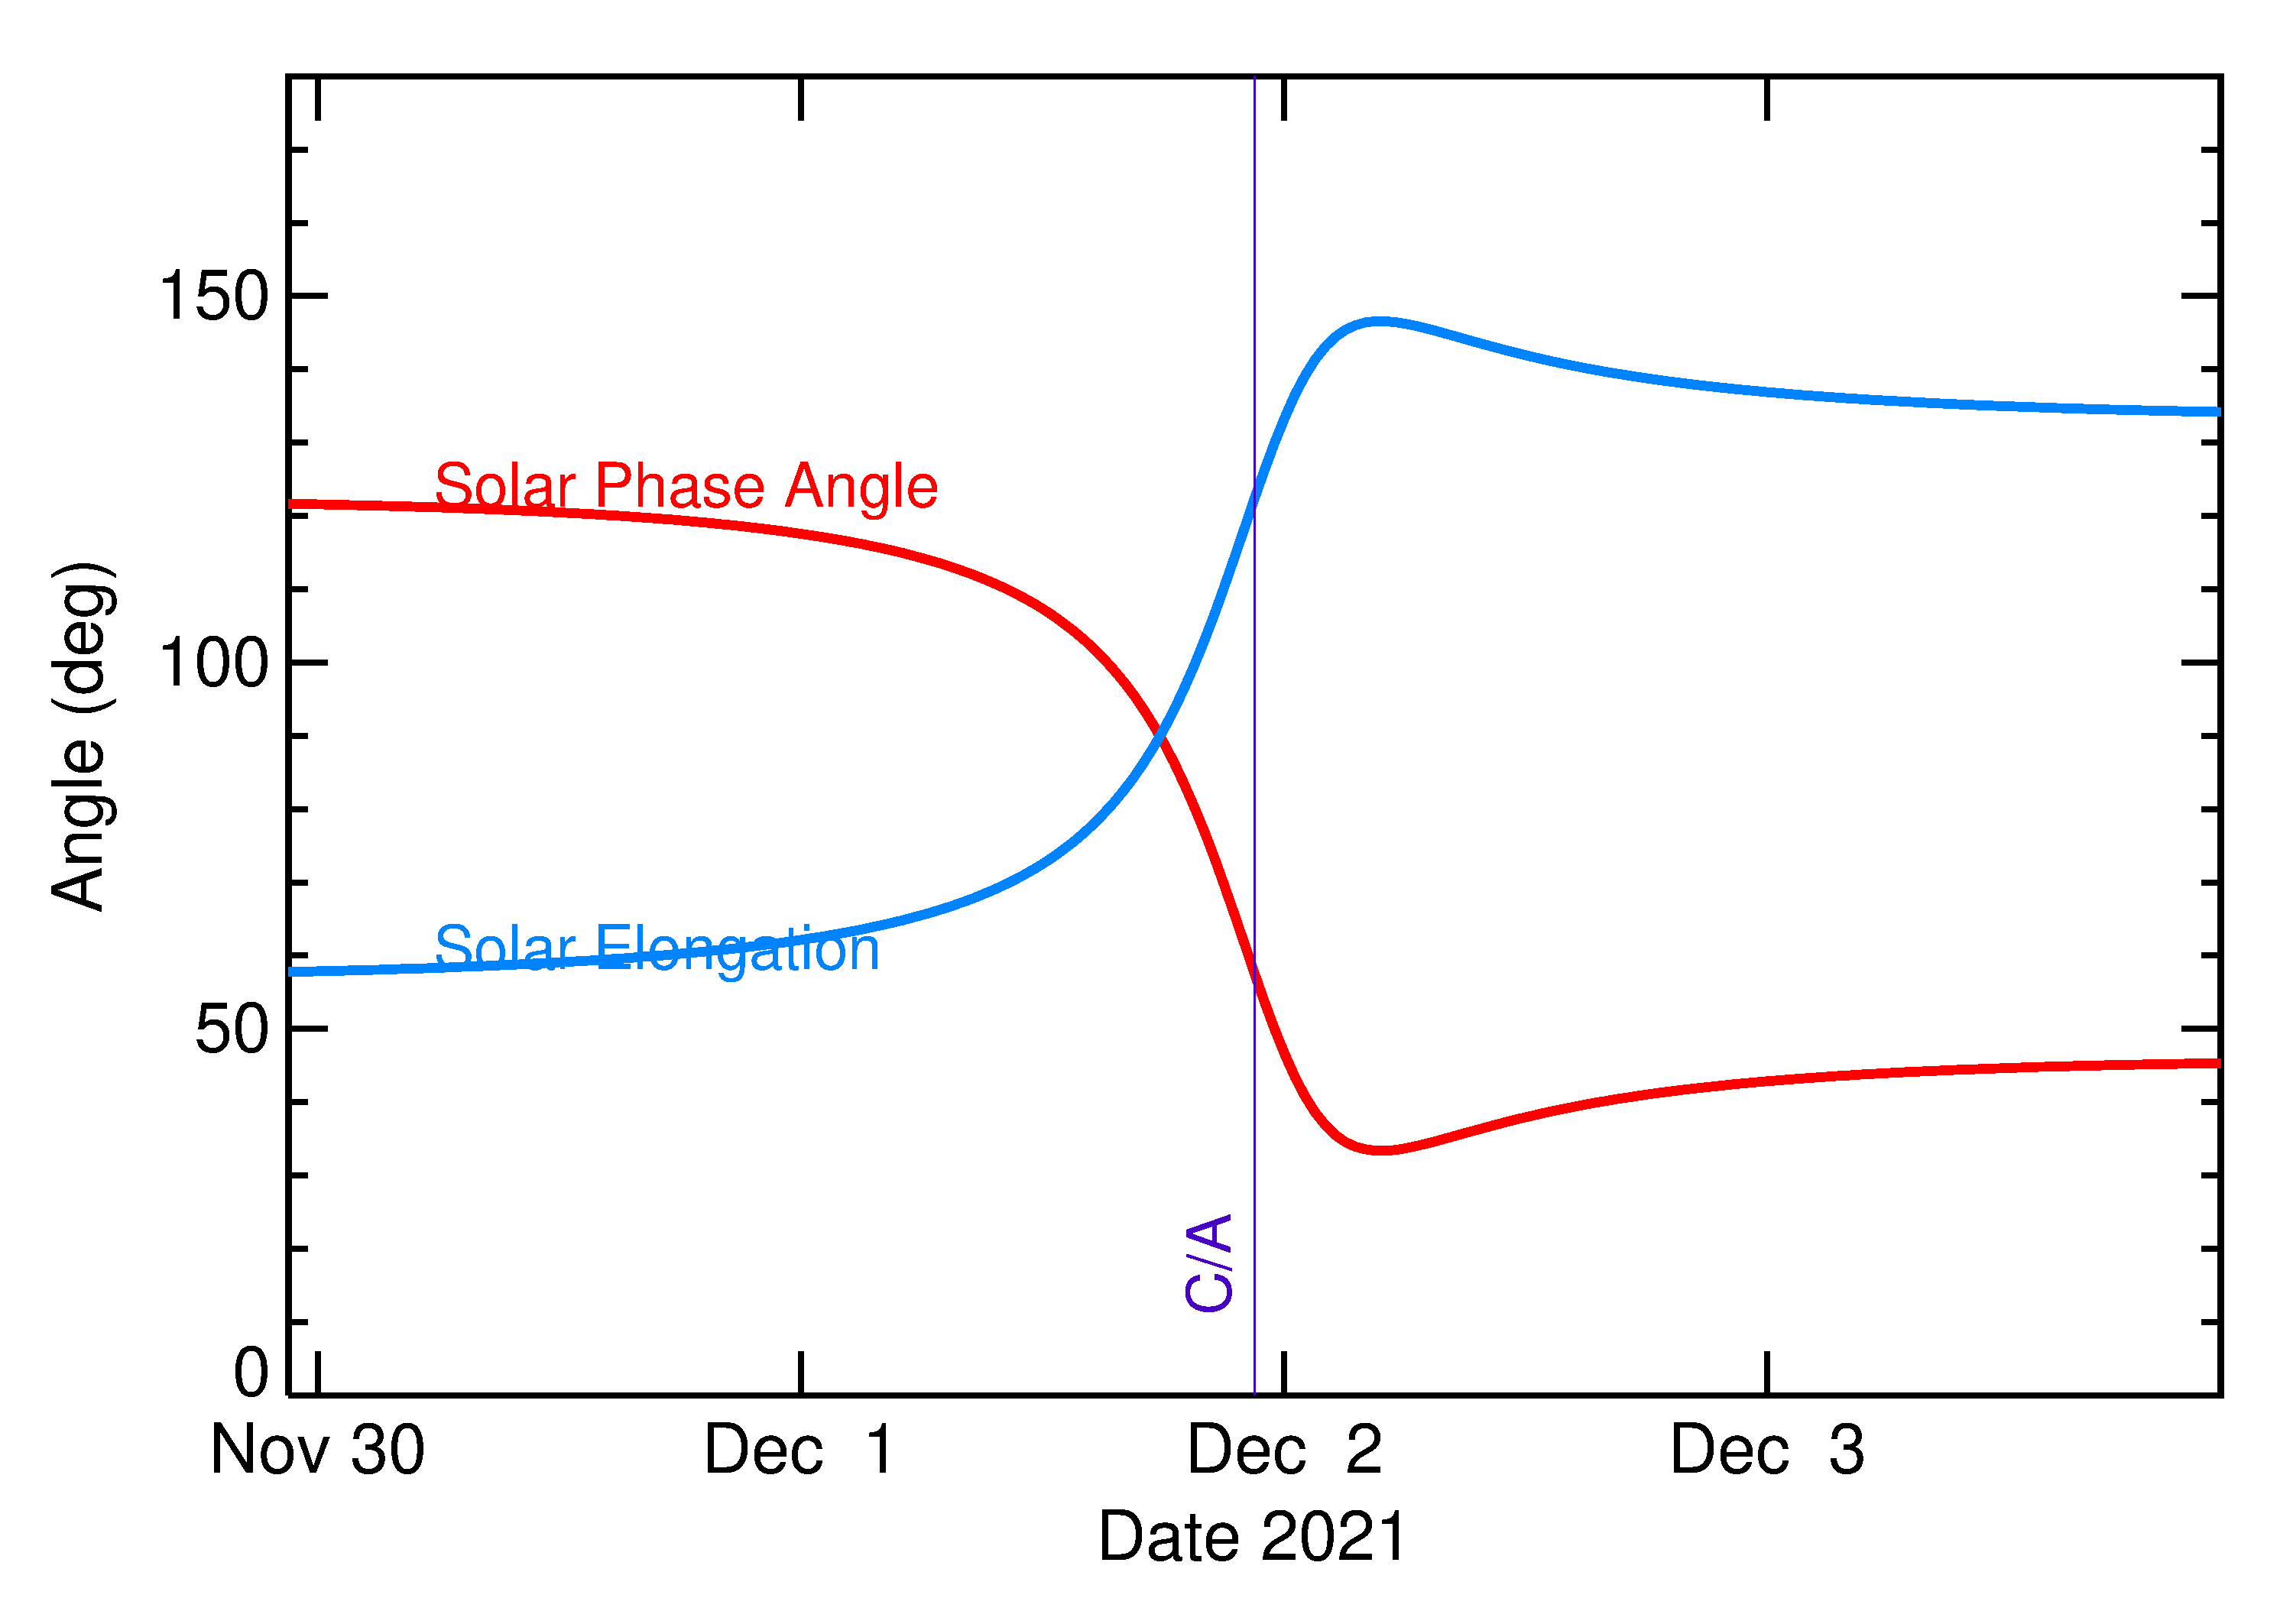 Solar Elongation and Solar Phase Angle of 2021 XL in the days around closest approach